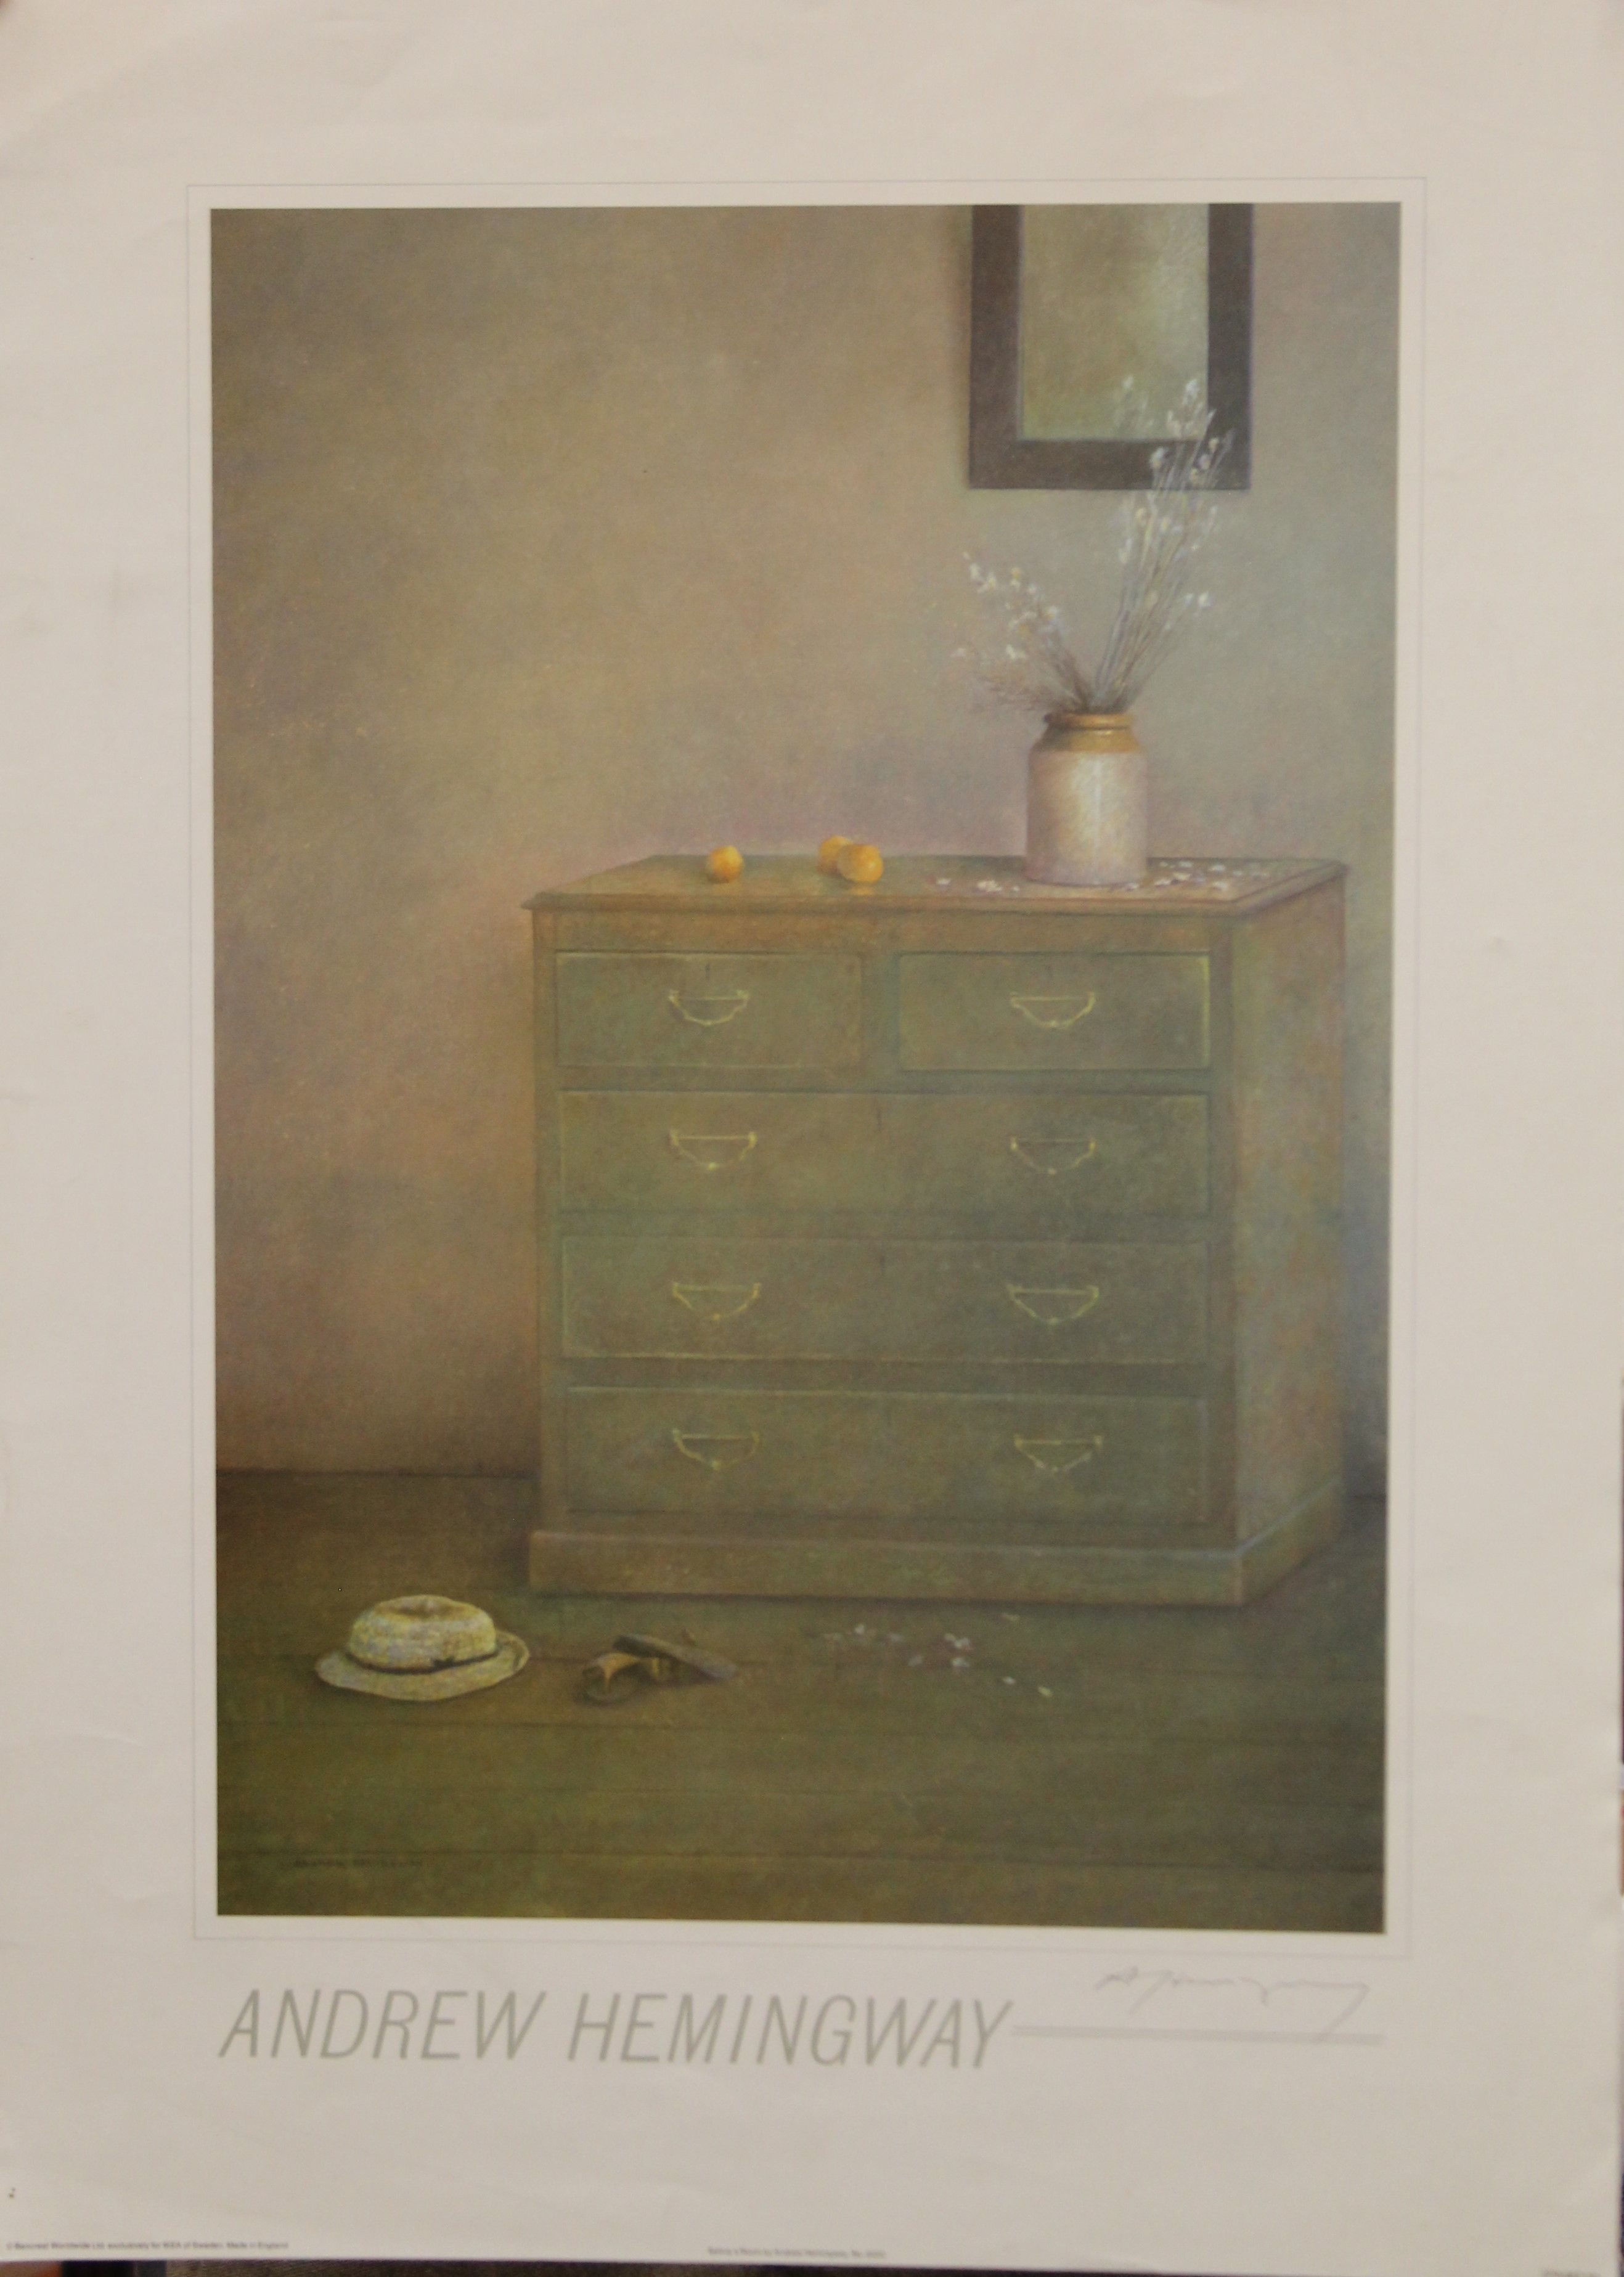 ANDREW HEMMINGWAY (born 1955) British, Selina's Room, print, signed in pencil, unframed. - Image 2 of 3